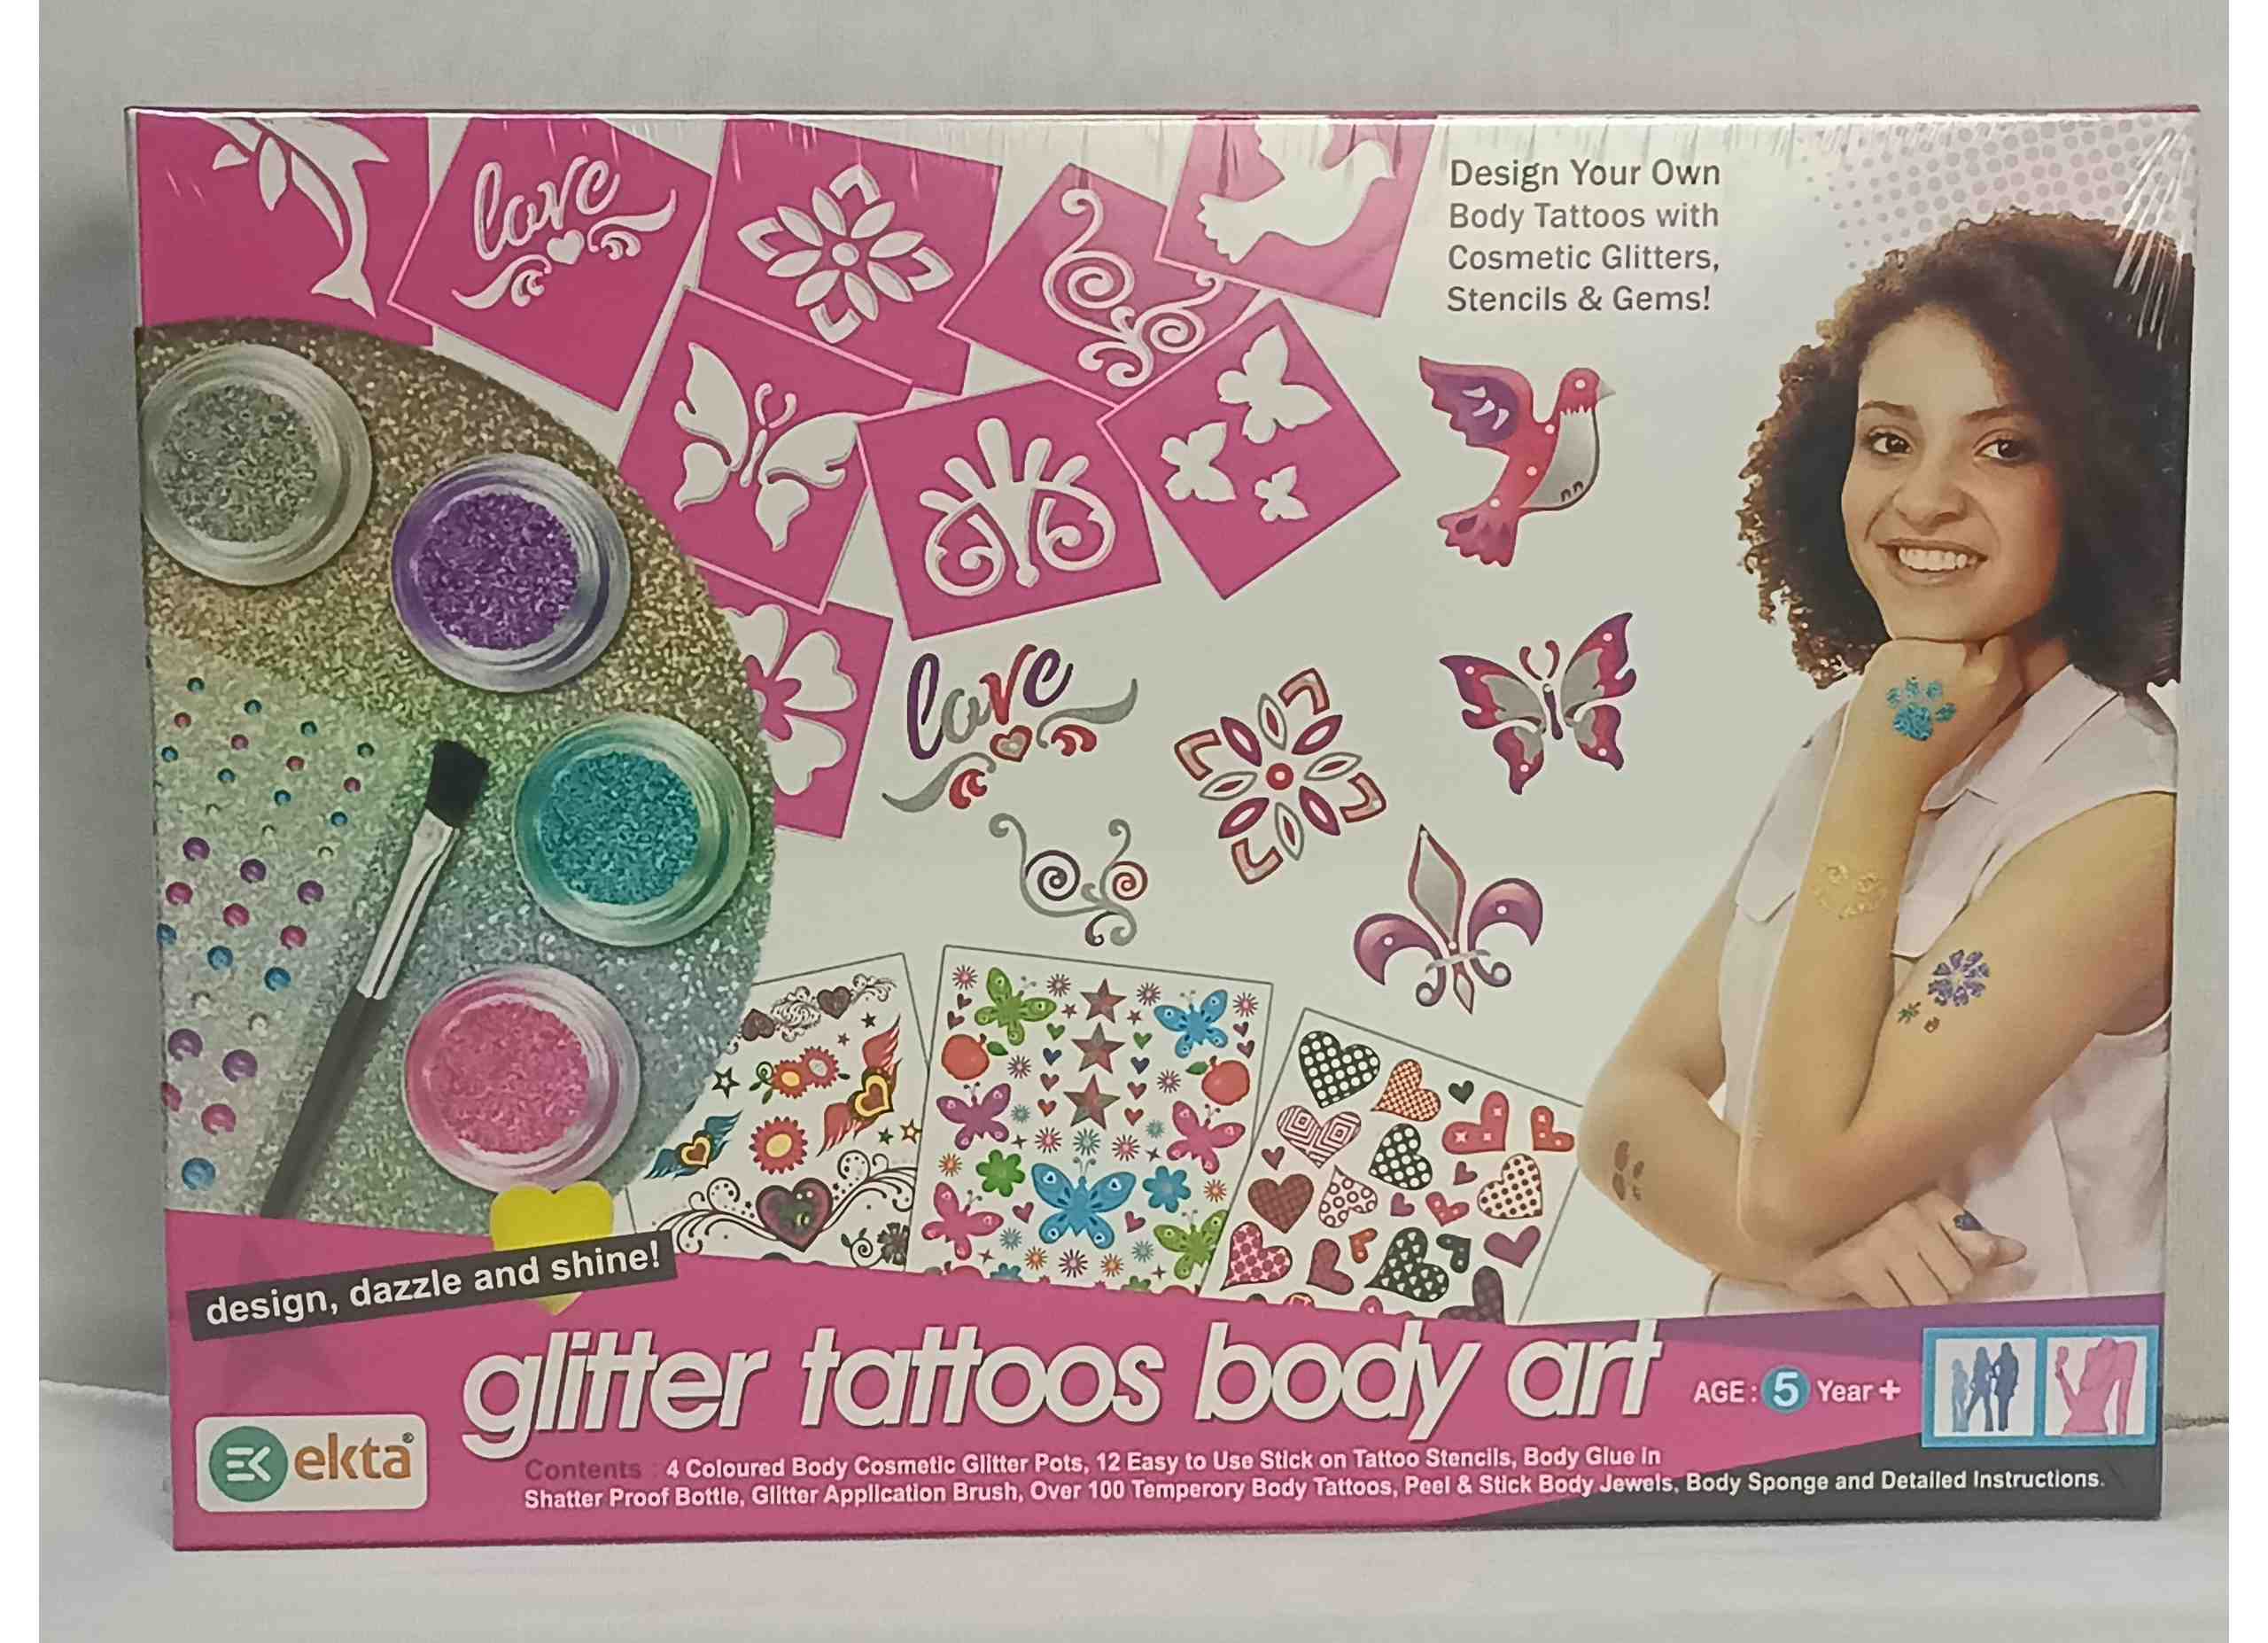 Glitter tattoo glam party | Face n Body Art